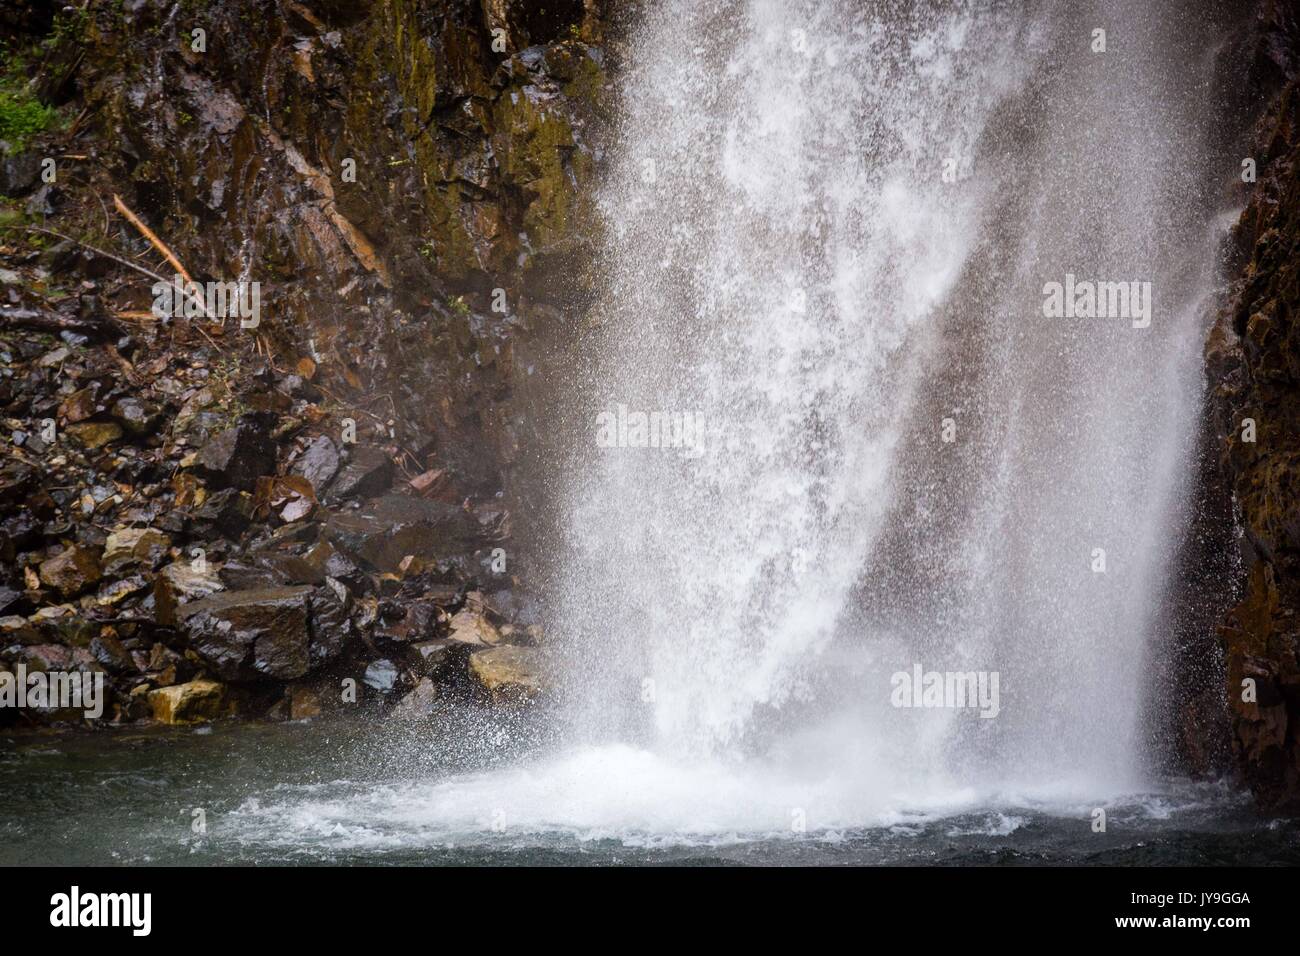 A view of Franklin Falls in Washington State. Franklin Falls is a popular family hike in the Seattle area. Stock Photo